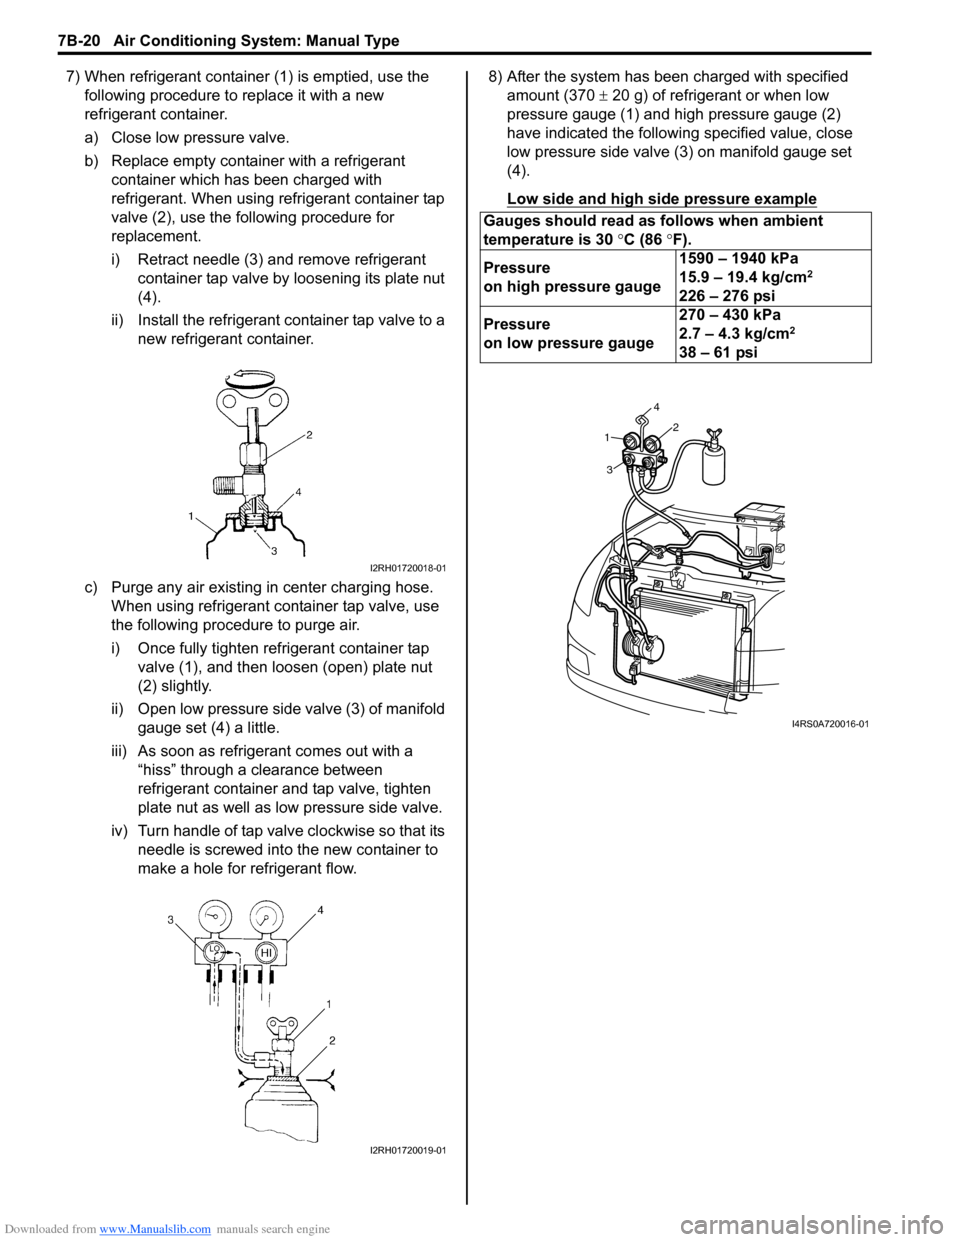 SUZUKI SWIFT 2005 2.G Service Workshop Manual Downloaded from www.Manualslib.com manuals search engine 7B-20 Air Conditioning System: Manual Type
7) When refrigerant container (1) is emptied, use the following procedure to replace it with a new 
